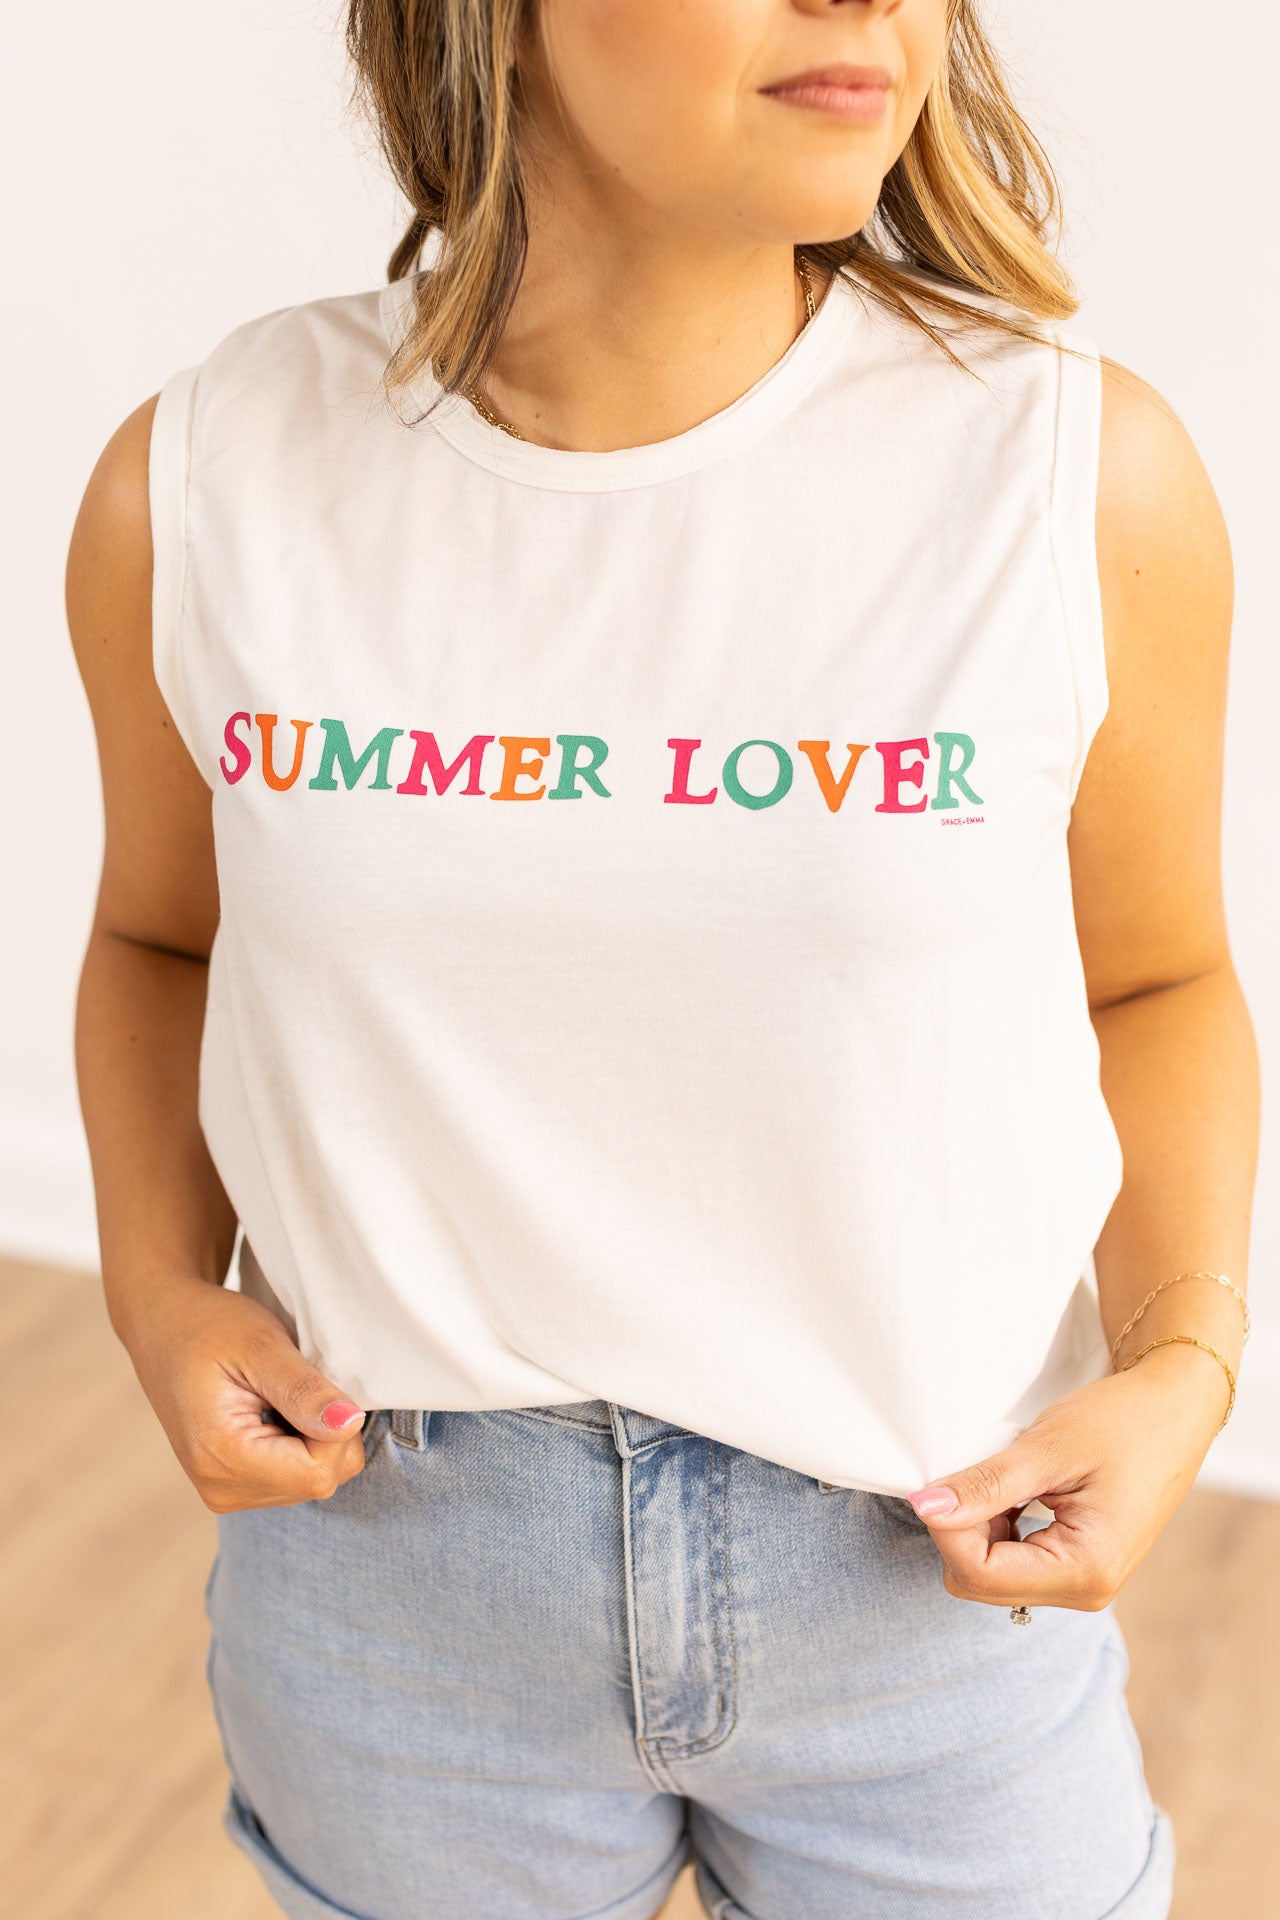 Summer Lover on Comfy Cutie White Tank